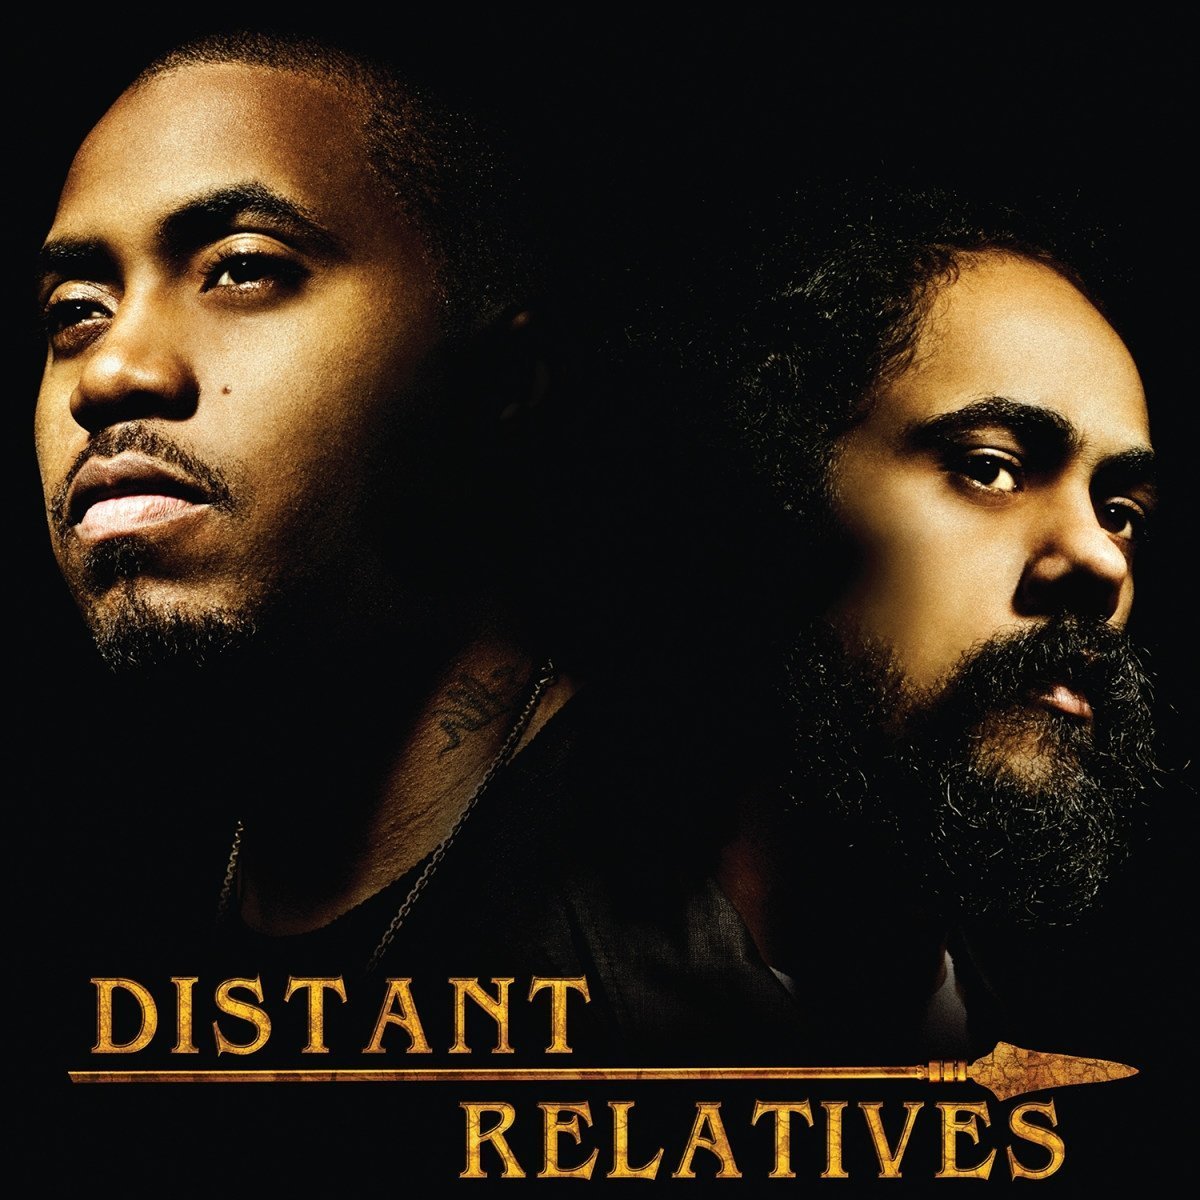 nas y damian marley distant relatives zippyshare download